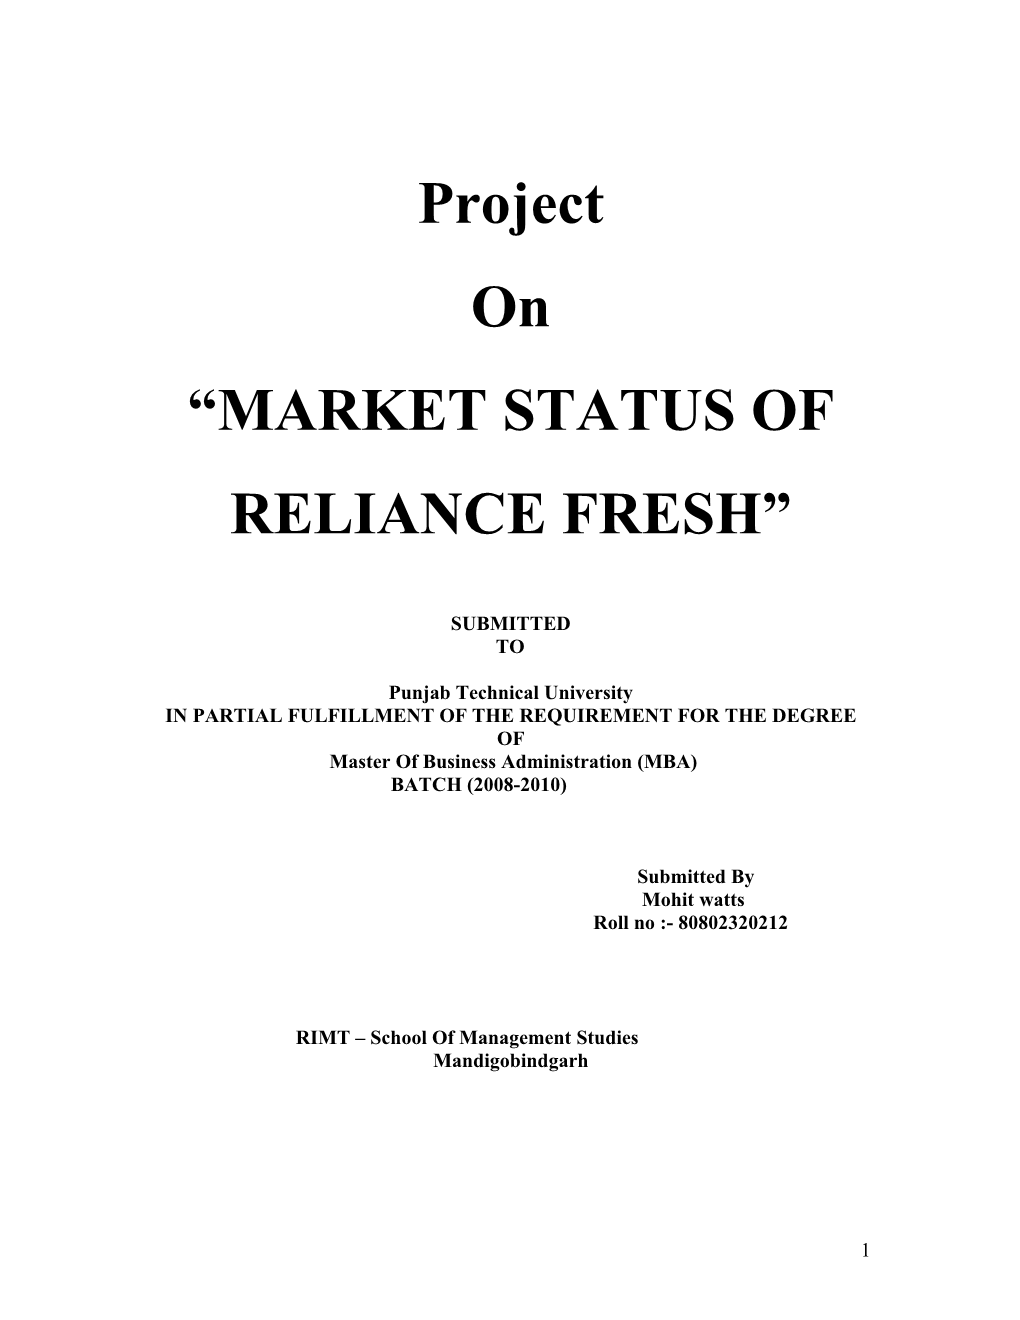 Project on “MARKET STATUS of RELIANCE FRESH”